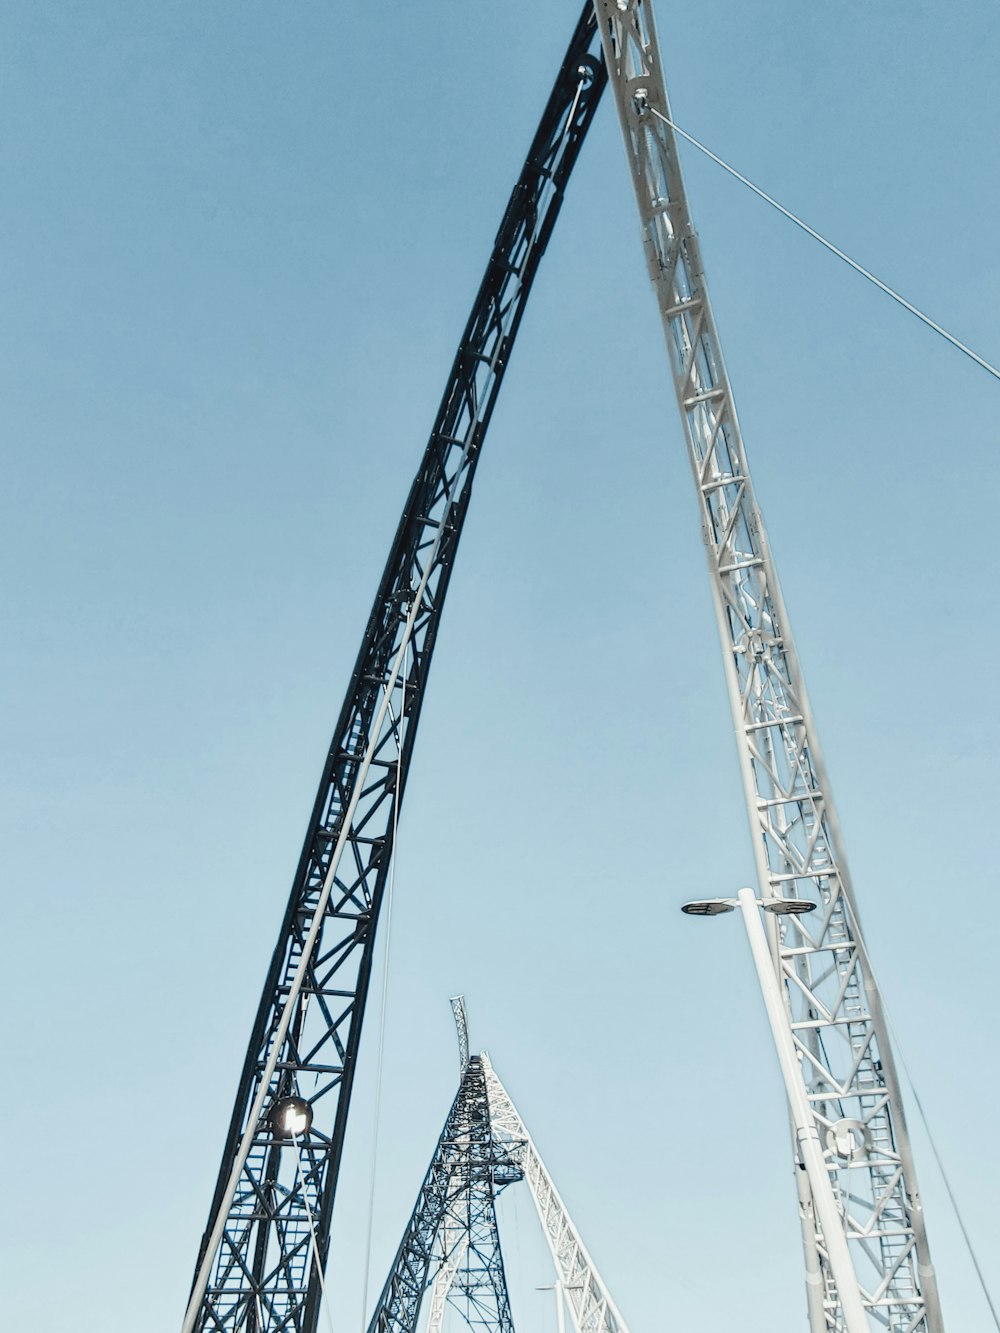 a large crane is in the middle of a blue sky